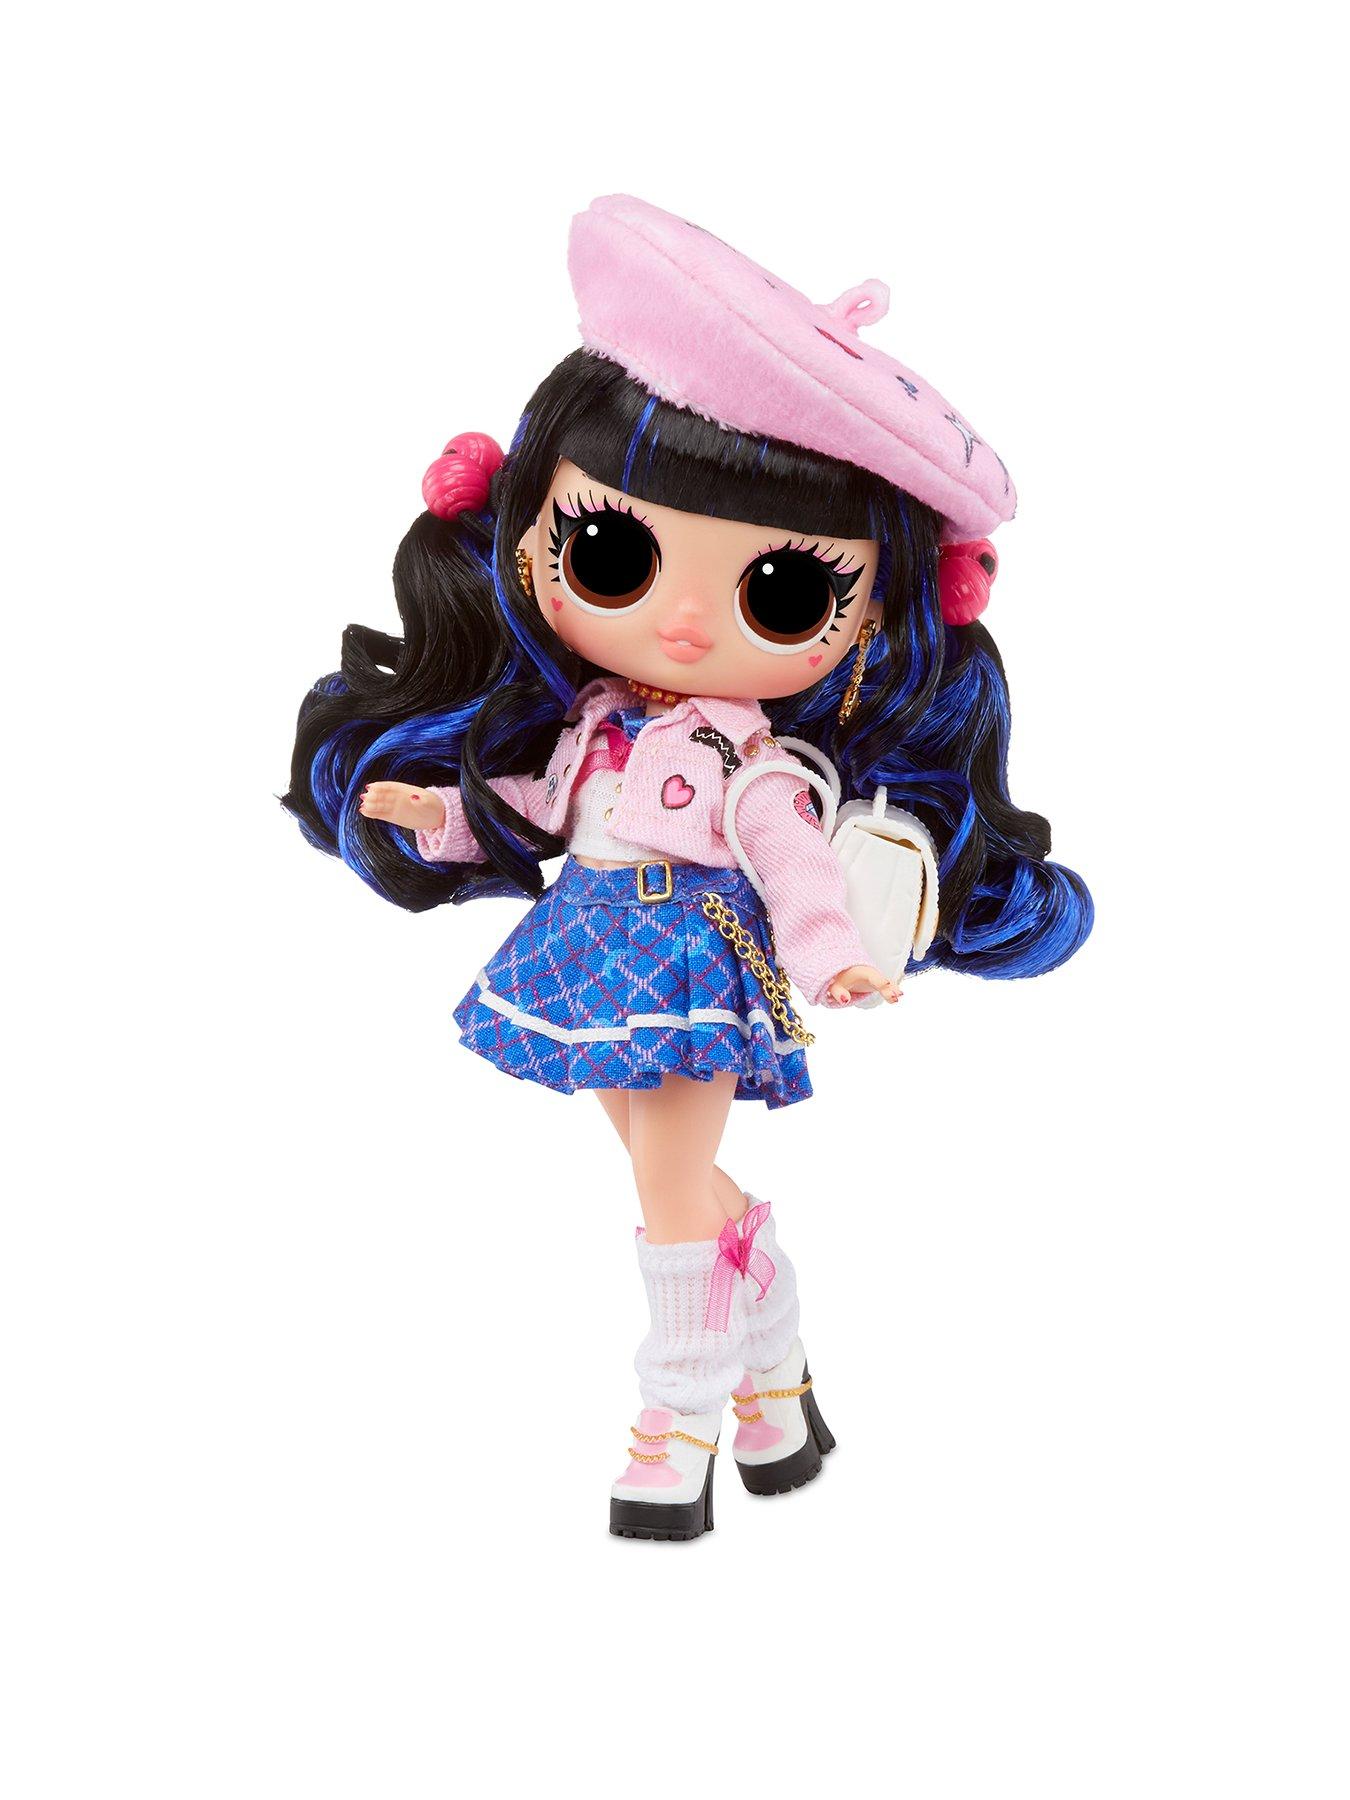 Details about   LOL Surprise Doll Glam Glitter CHERRY Big Sister Real L.O.L toy gift 